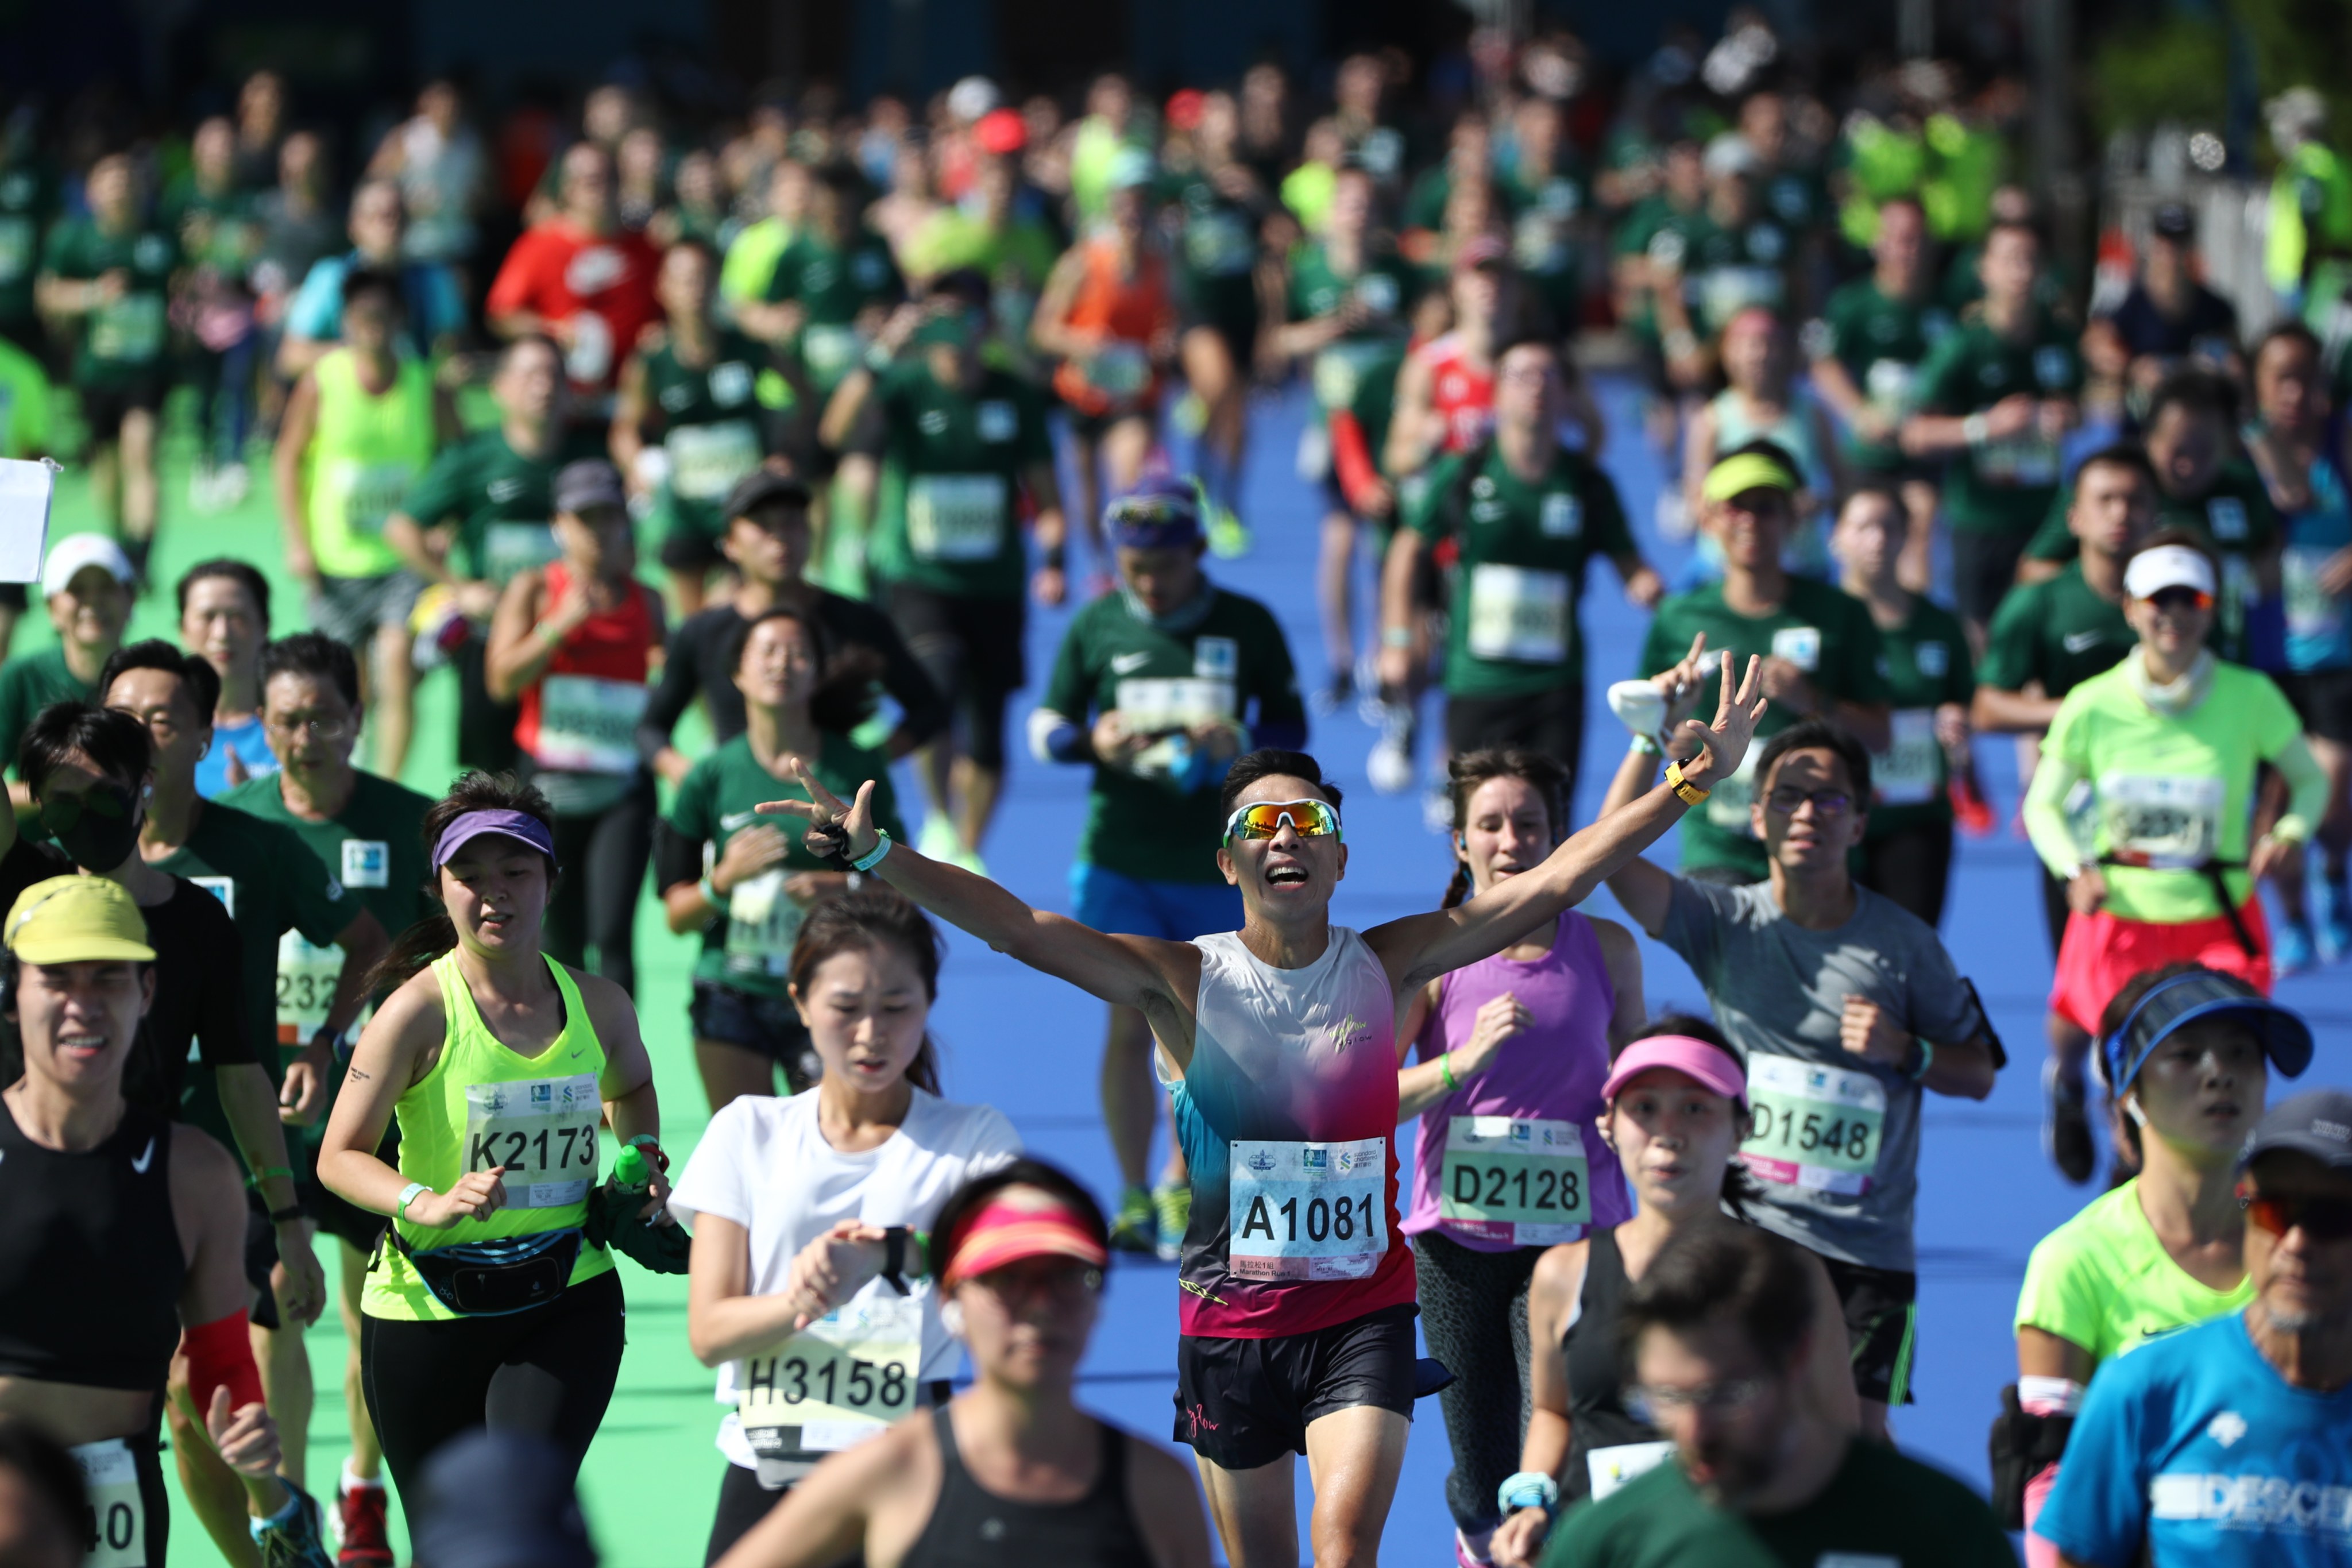 Runners arrive at the finish line of the 2021 Standard Chartered Hong Kong Marathon at Victoria Park, Causeway Bay. Photo: Nora Tam